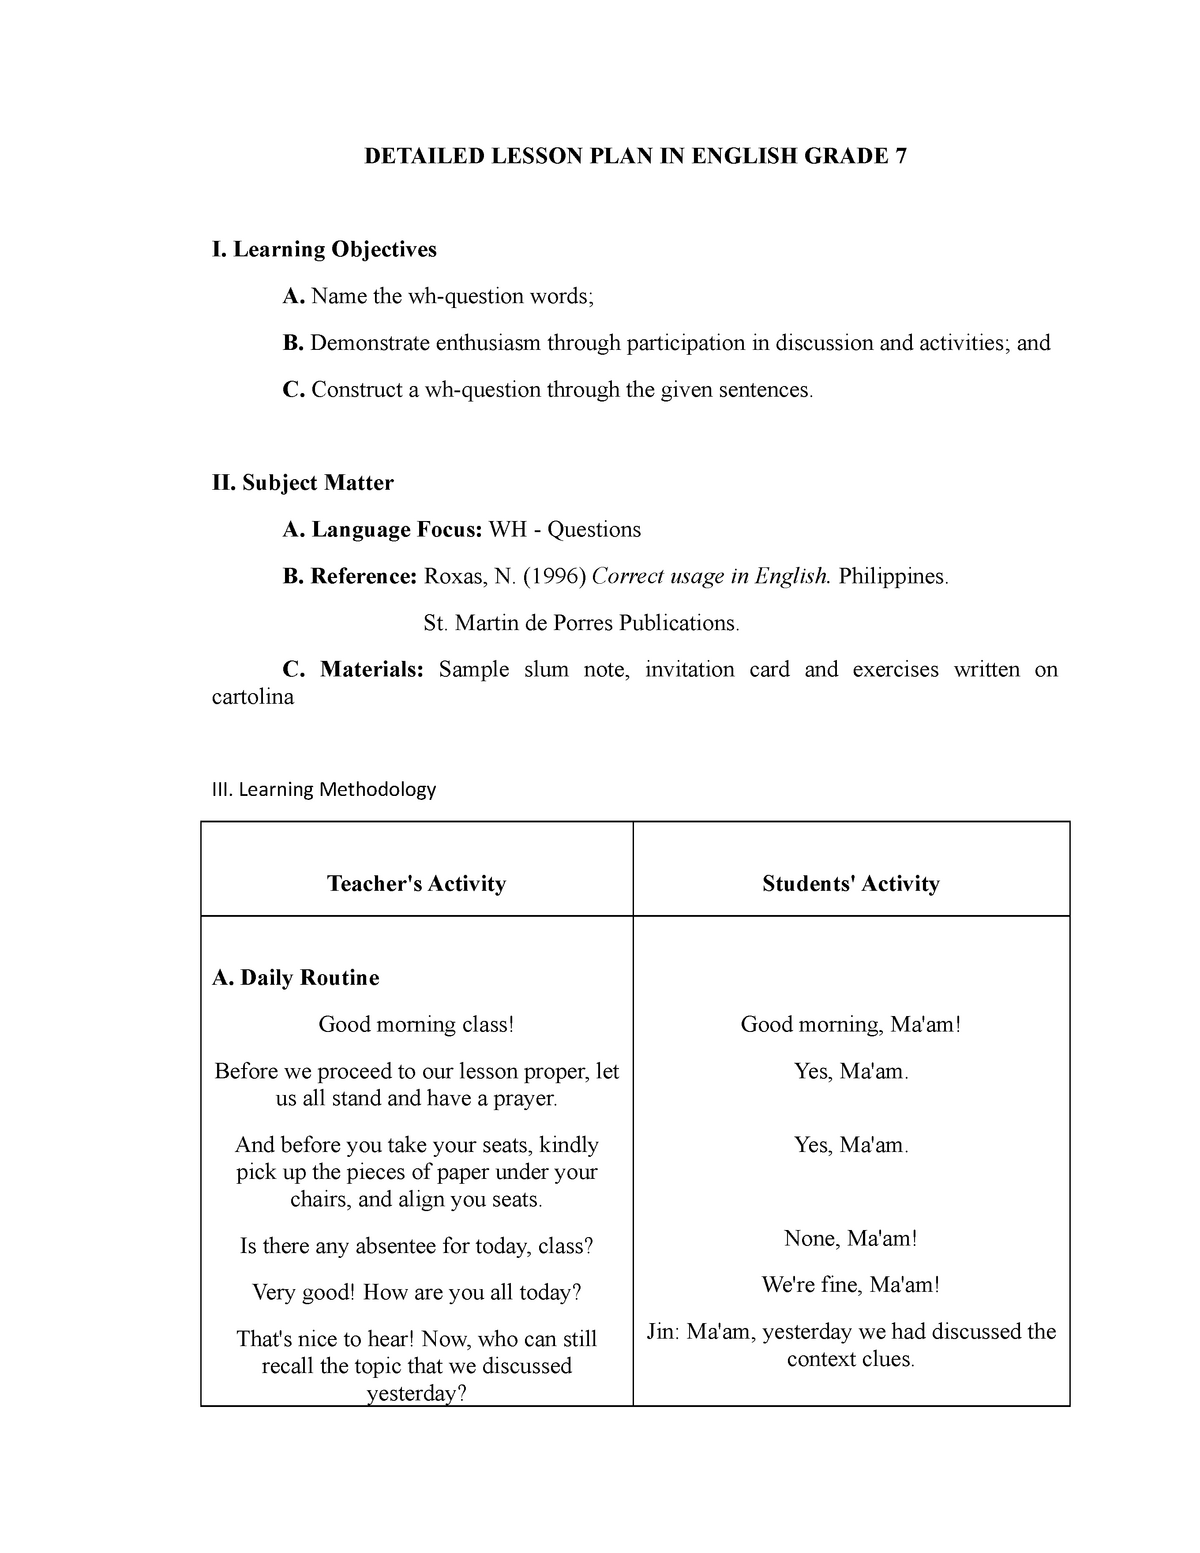 sample-lesson-plan-in-english-by-juliane-larkspur-detailed-lesson